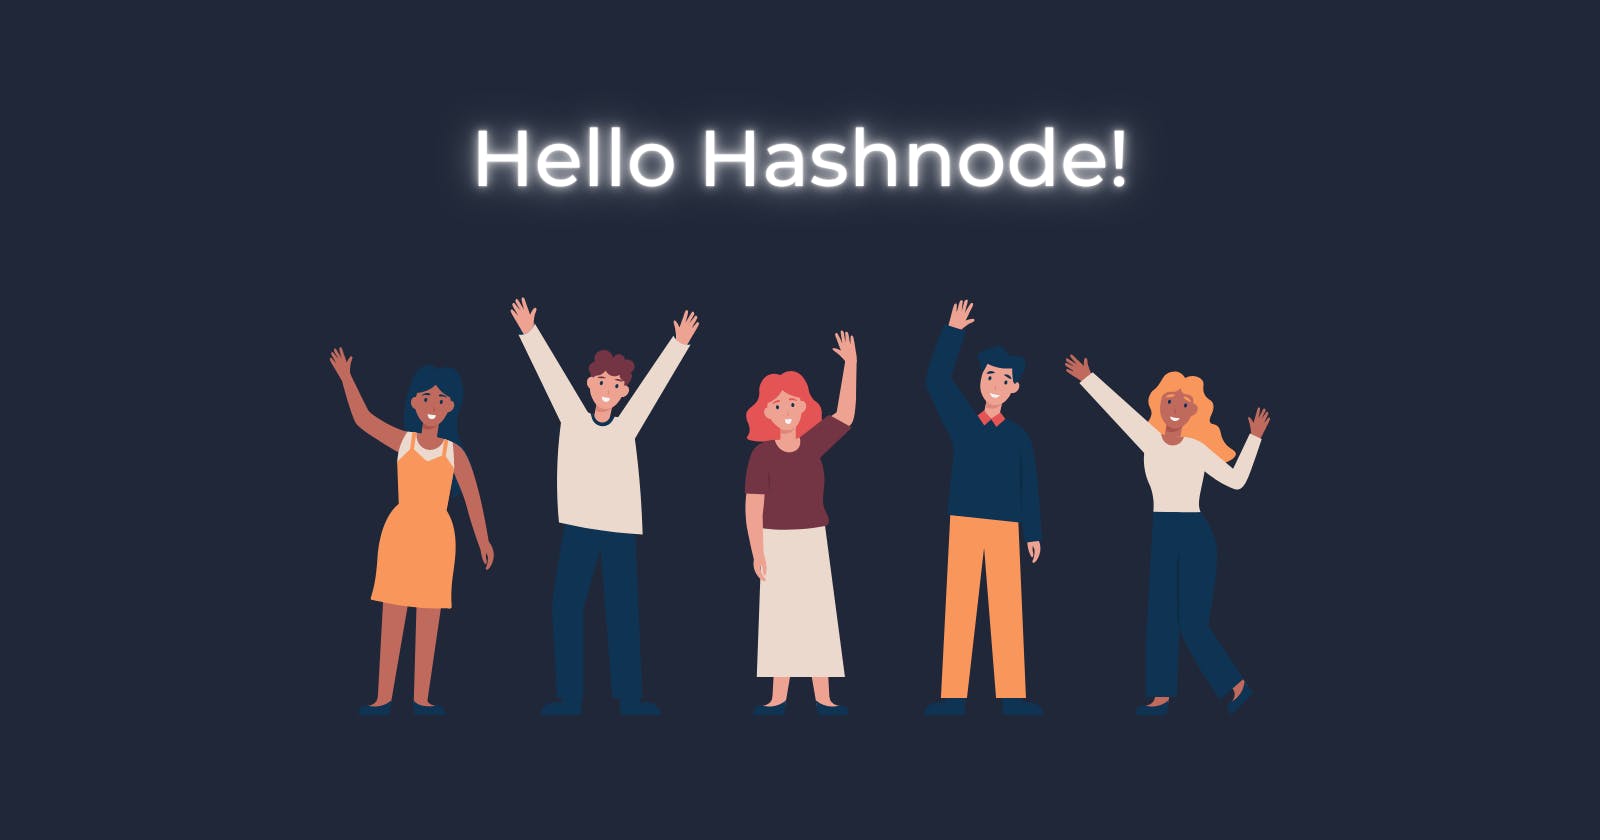 Hello Hashnode! Here's why I develop things.